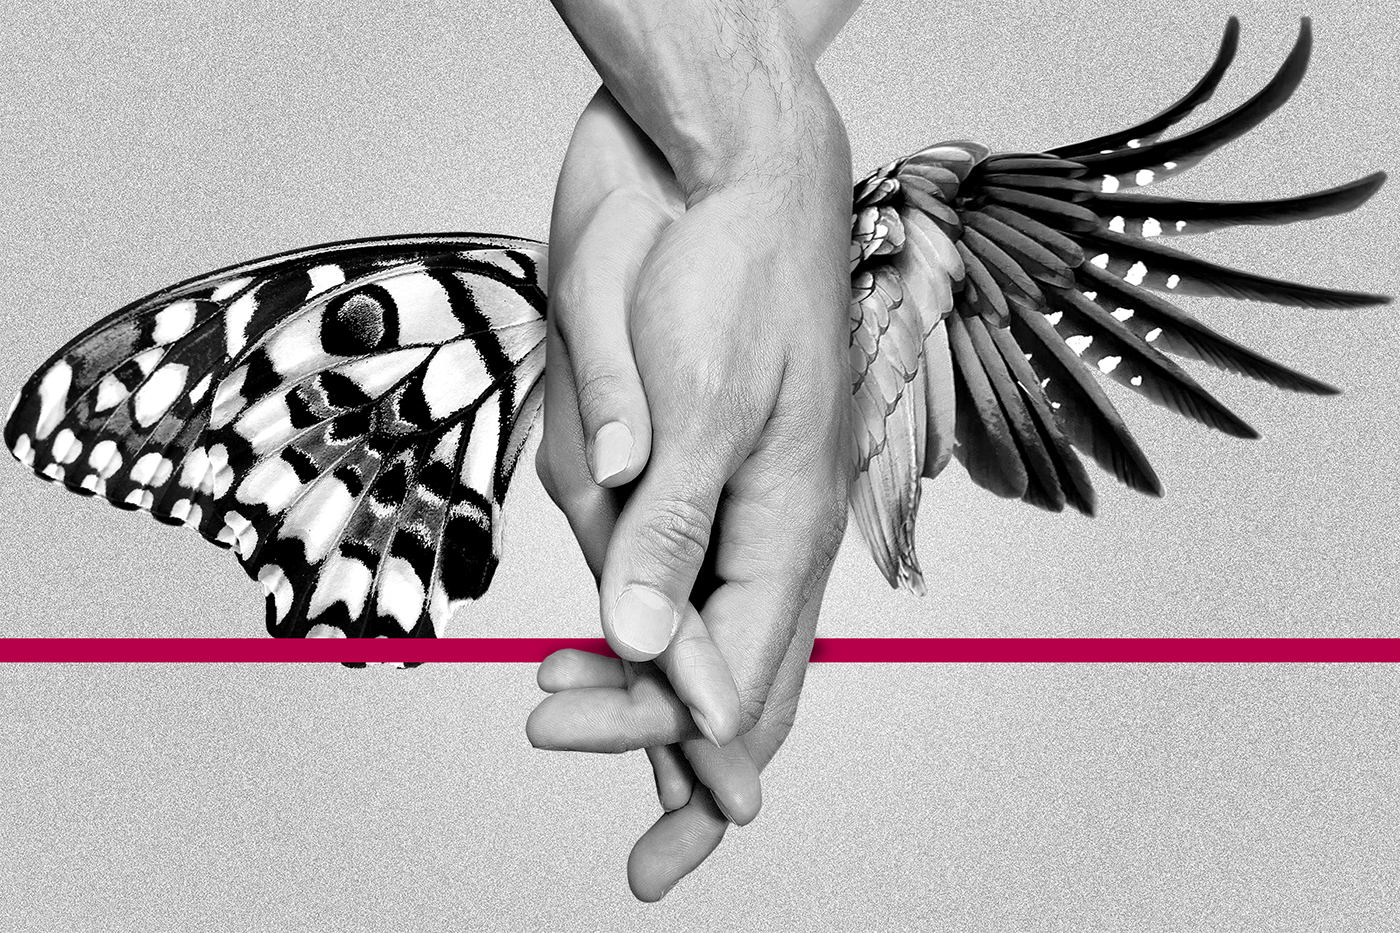 collage Love hands wings red string fate hilo rojo Costa Rica amor Manos